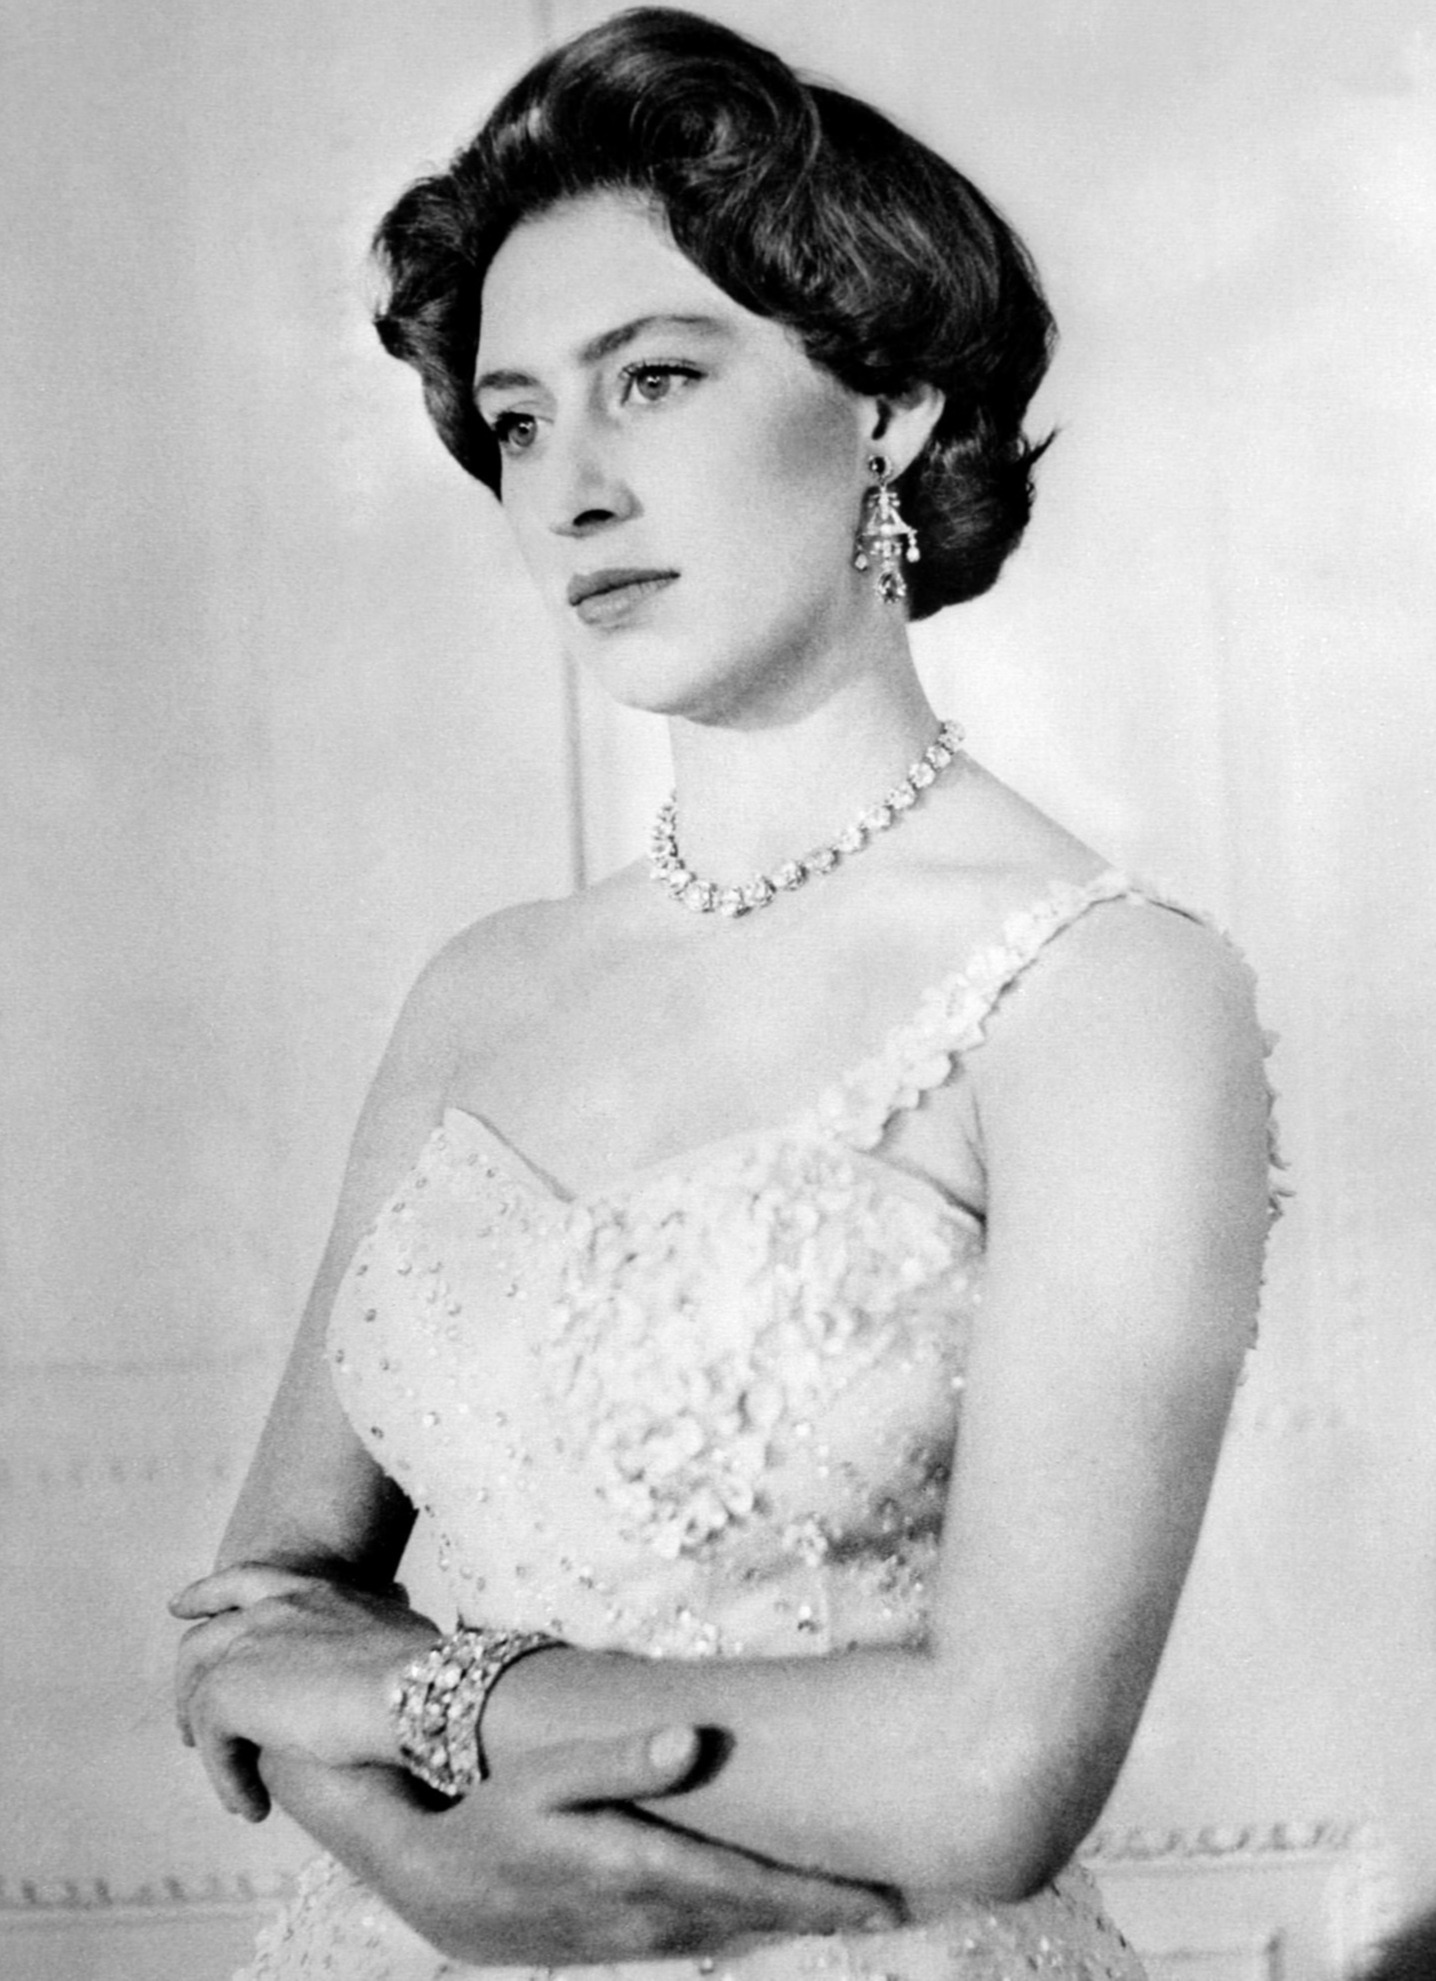 The princess, pictured in 1956 during her 26th birthday, had started smoking at a young age